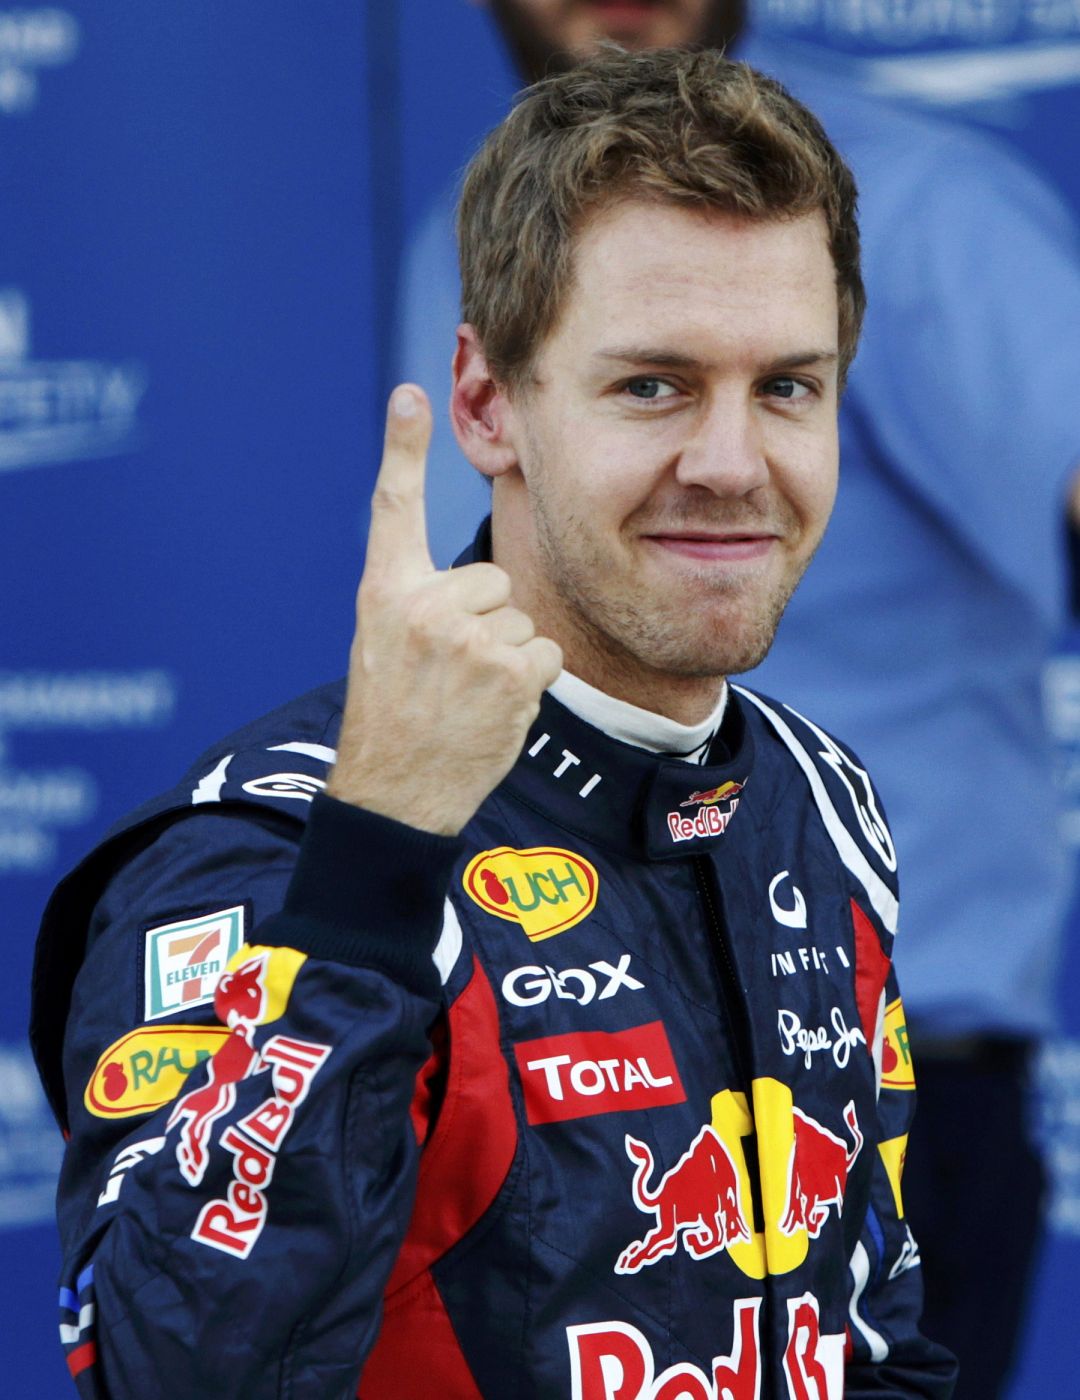 Red Bull Formula One driver Vettel celebrates taking the pole position after the qualifying session of the Japanese F1 Grand Prix at the Suzuka circuit